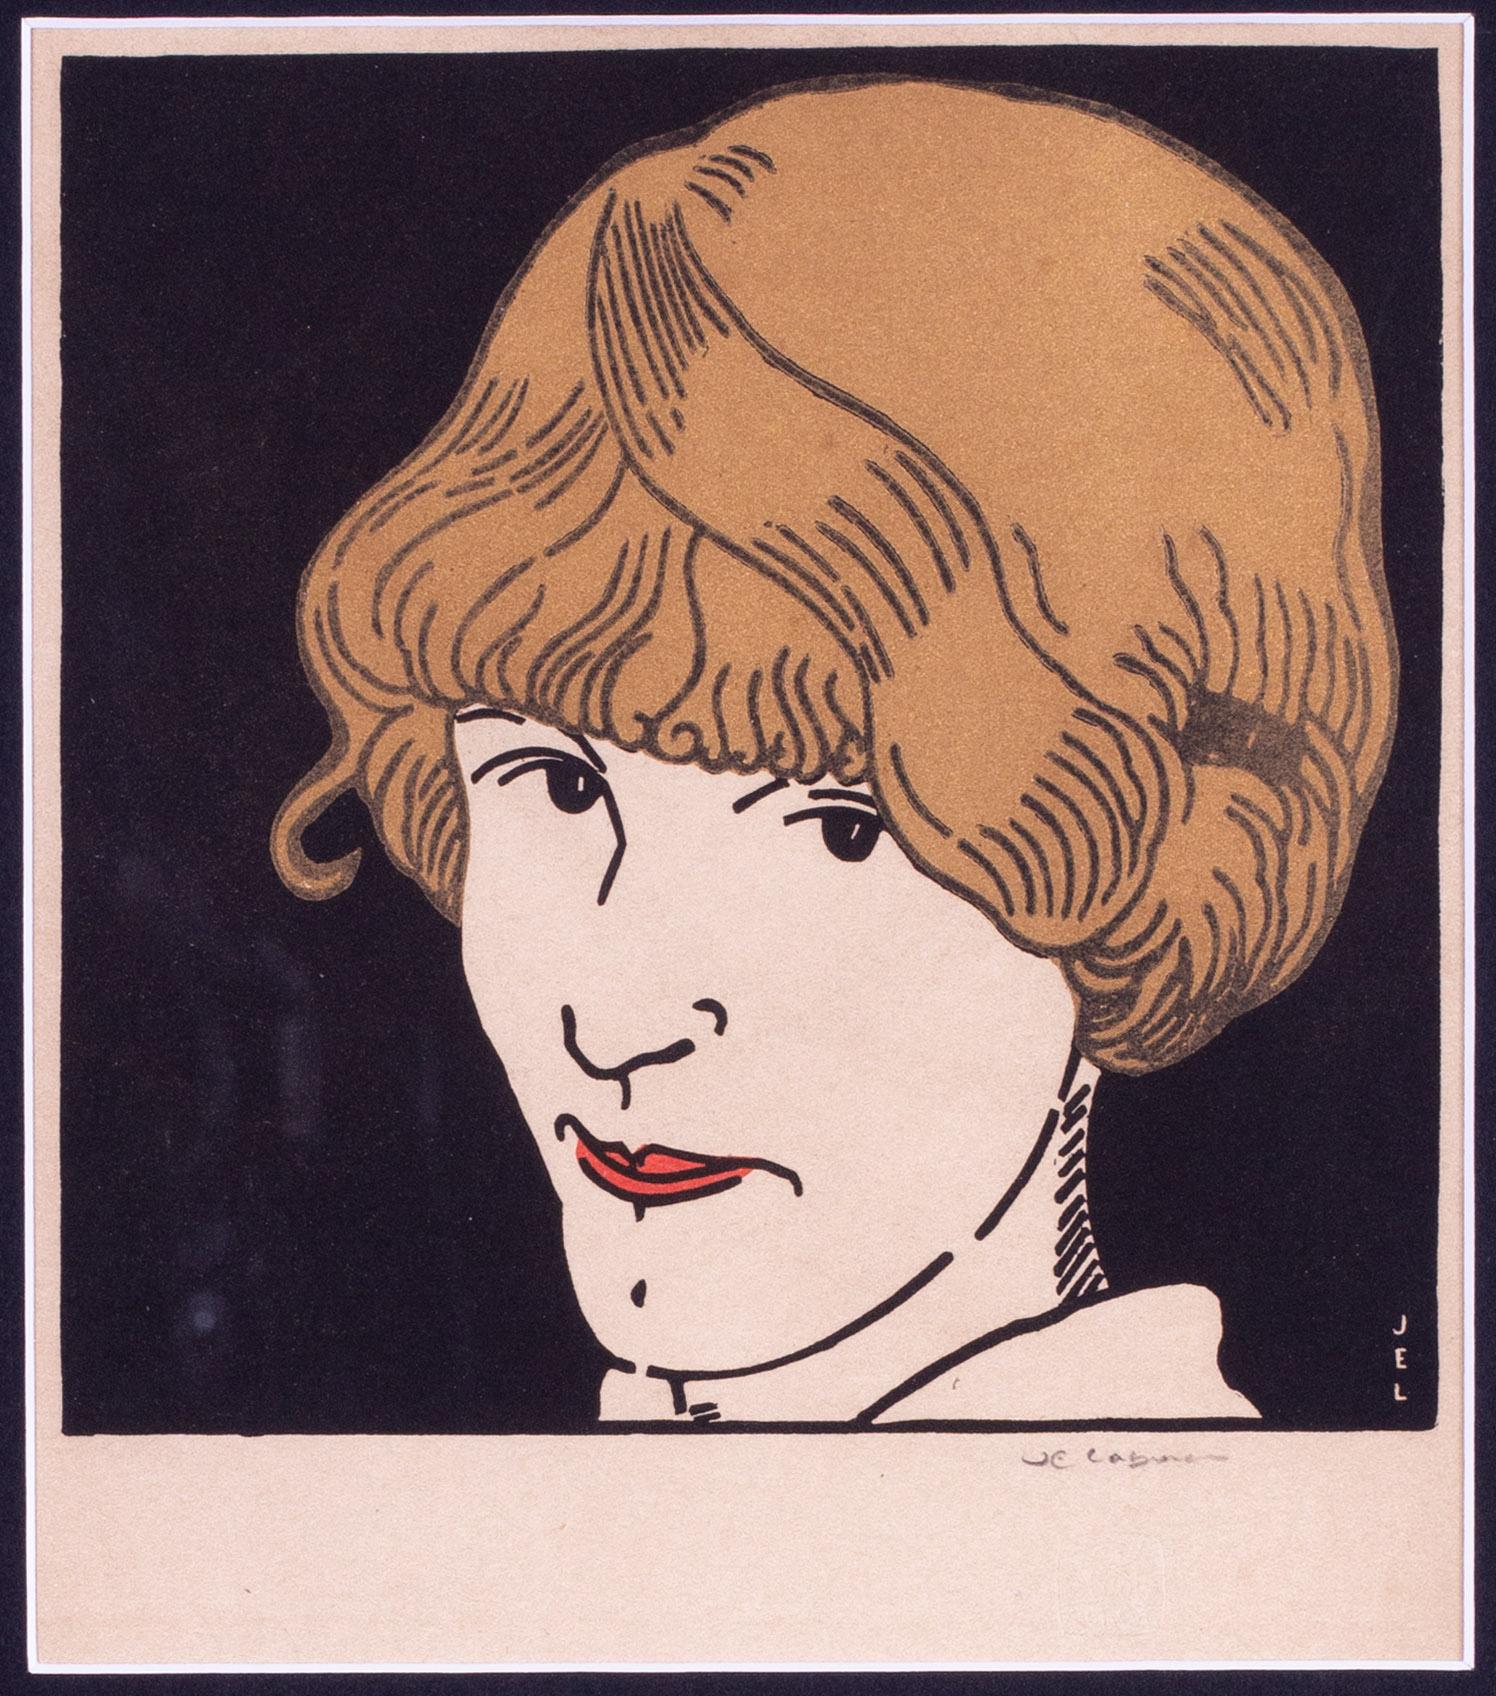 Jean Emile Laboureur (French, 1877-1943)
Masque aux cheveux d'or (1912)
Woodcut
Signed `J E Laboureur’ (lower right) and stamped `The London Studio’ (lower right)
6.7/8 x 6 in. (17.5 x 15.3 cm.) to mount slip 

Jean Emile Laboureur was a versatile